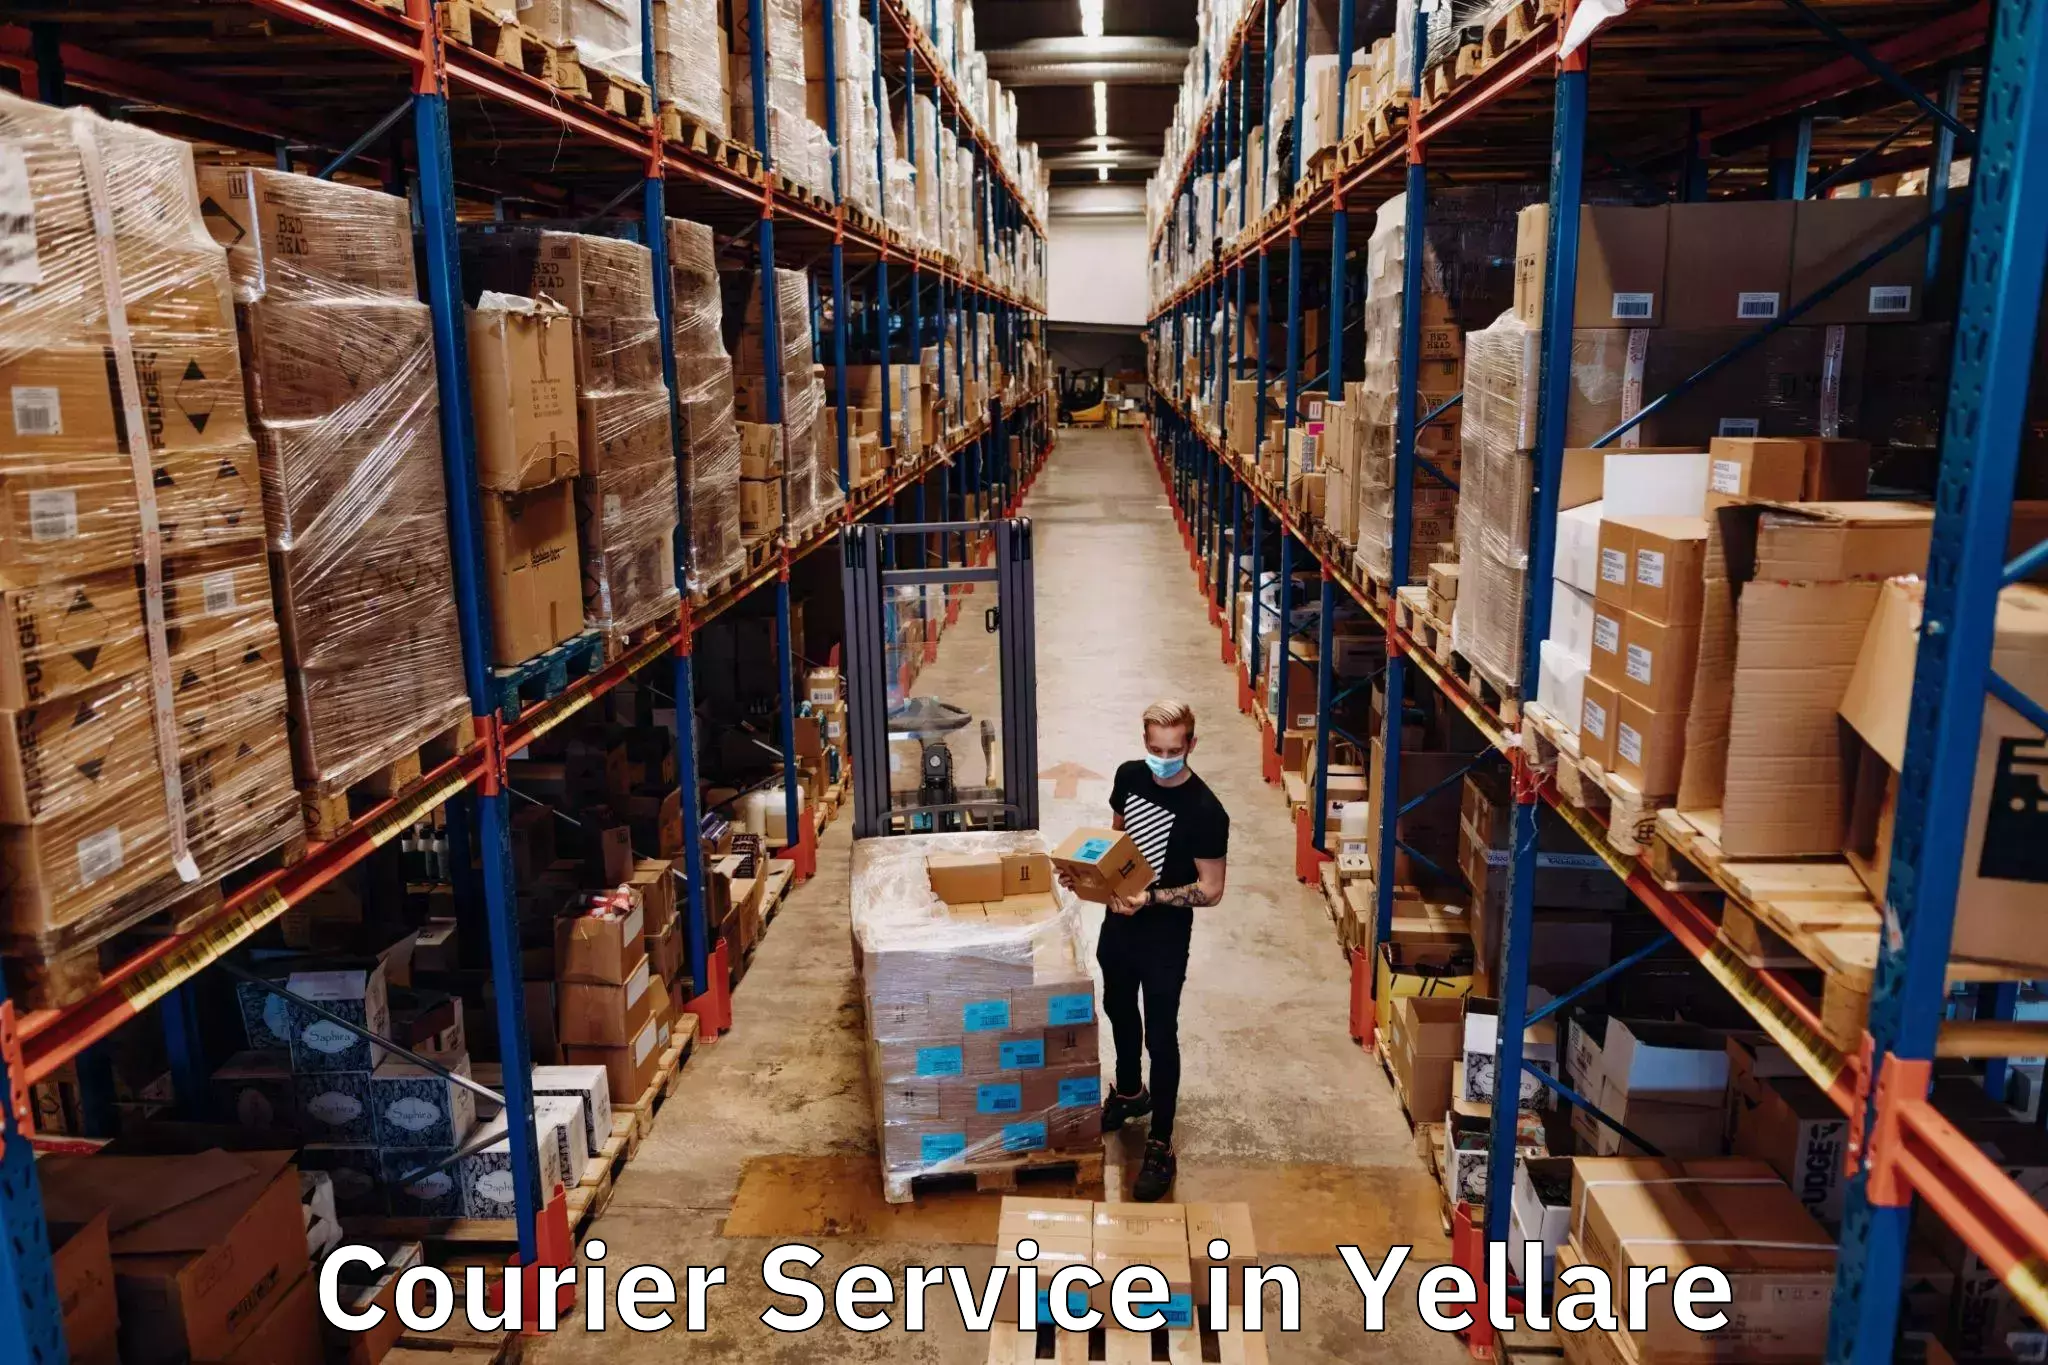 Efficient parcel tracking in Yellare